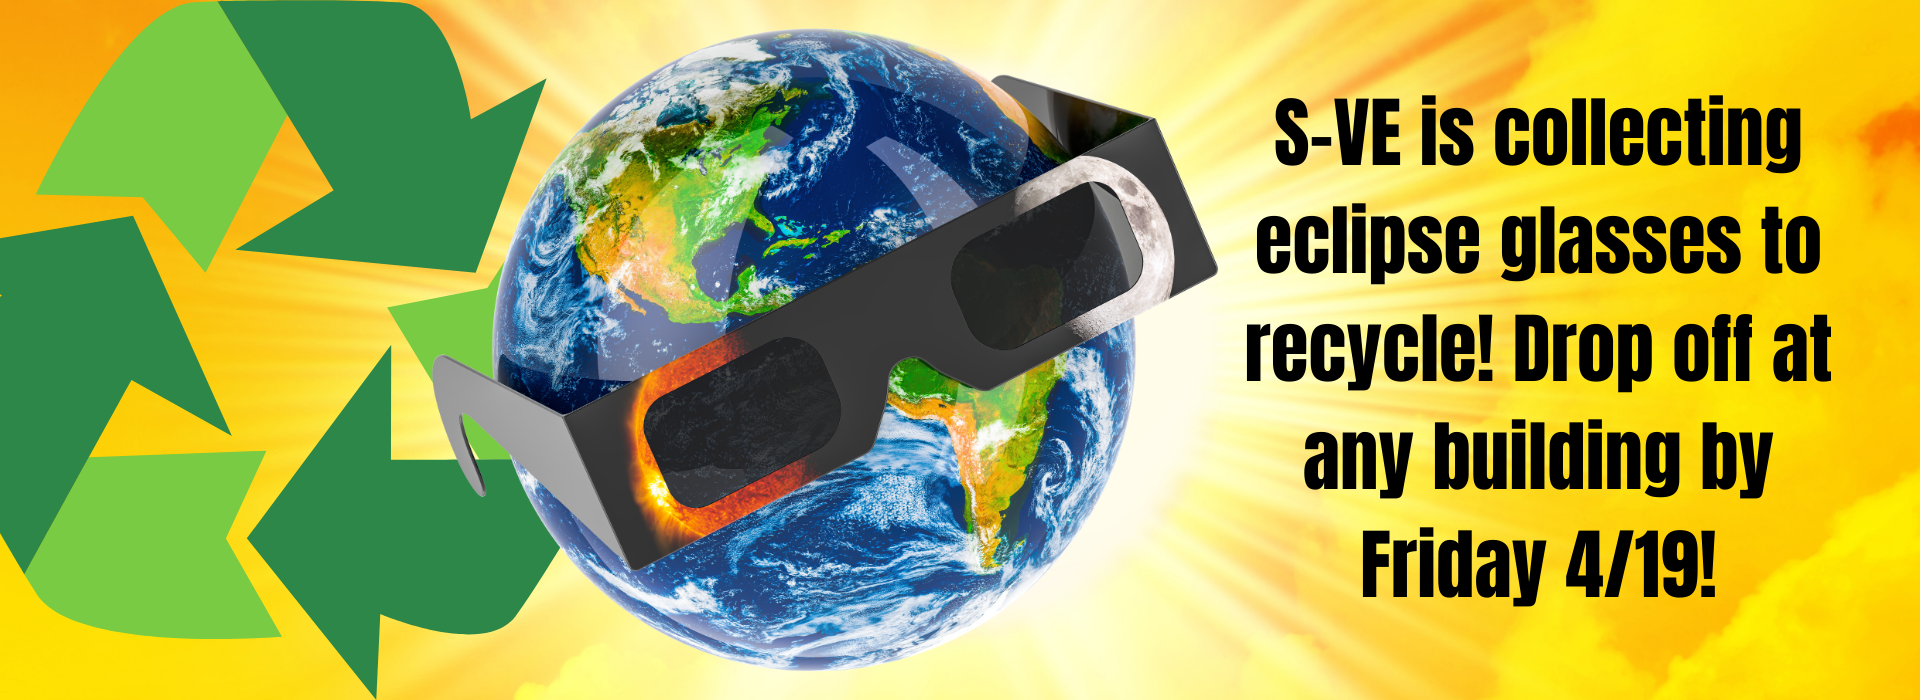 eclipse glasses recycling